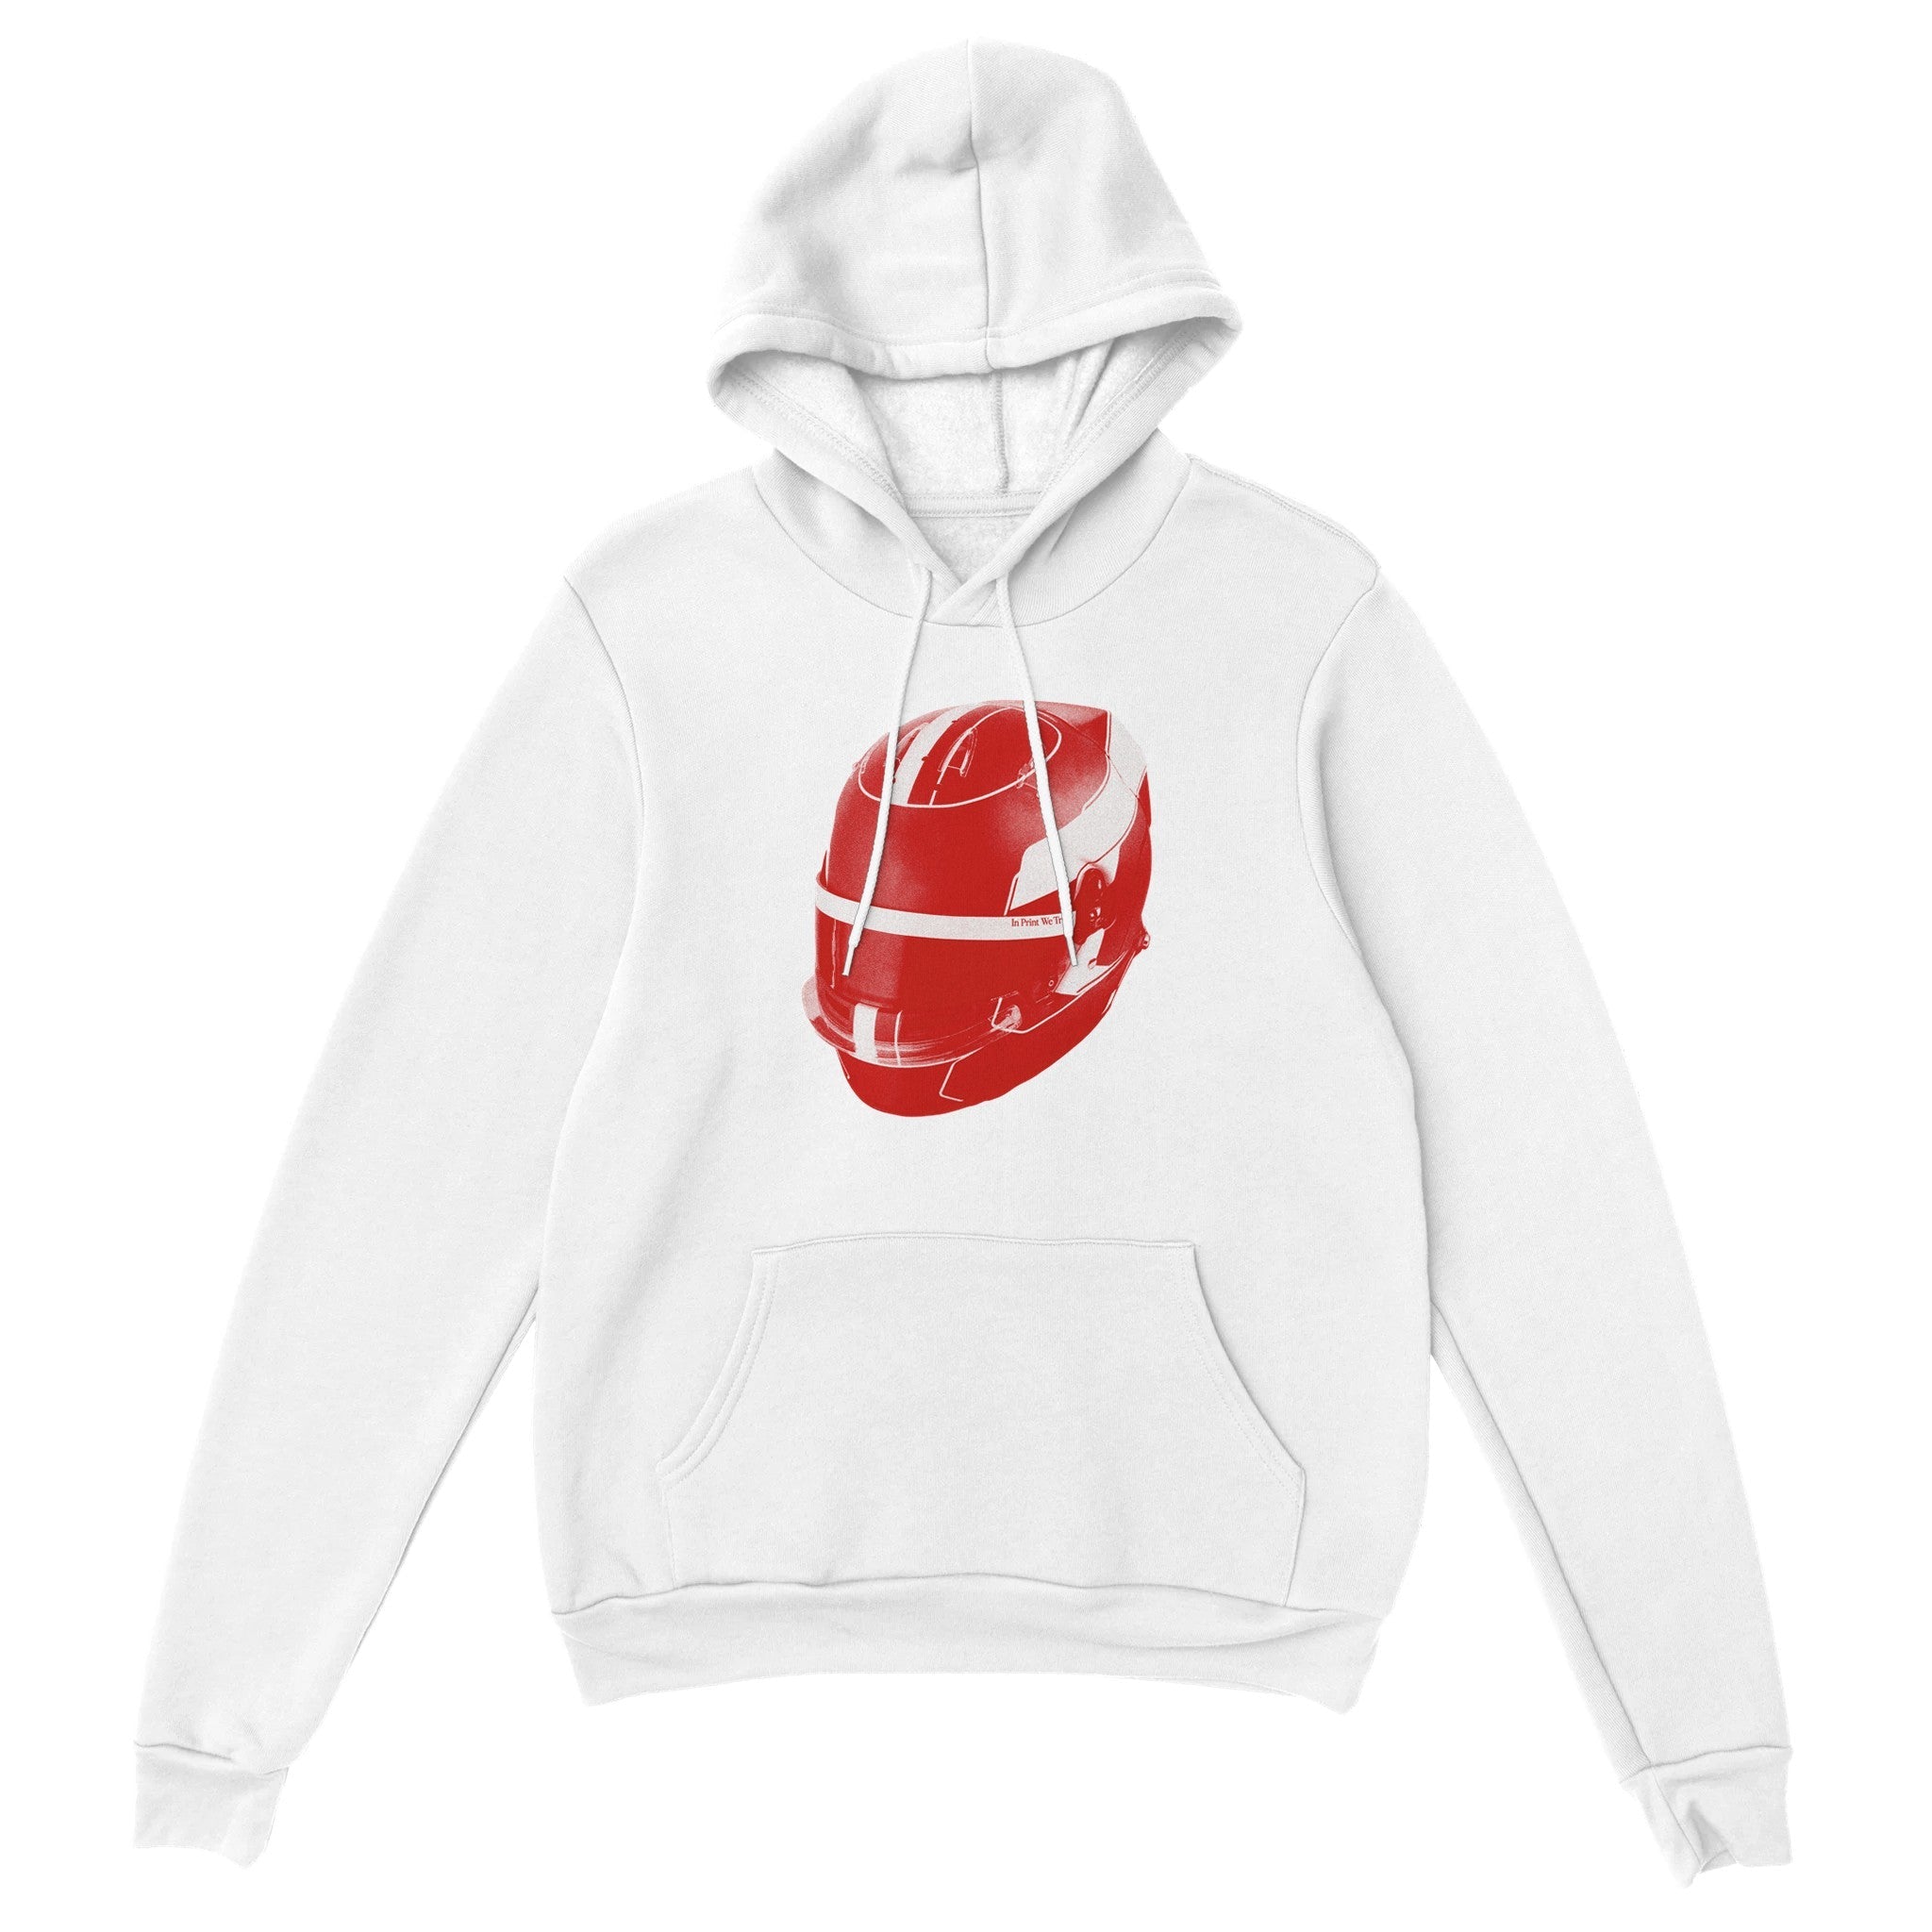 'Safety First' hoodie - In Print We Trust